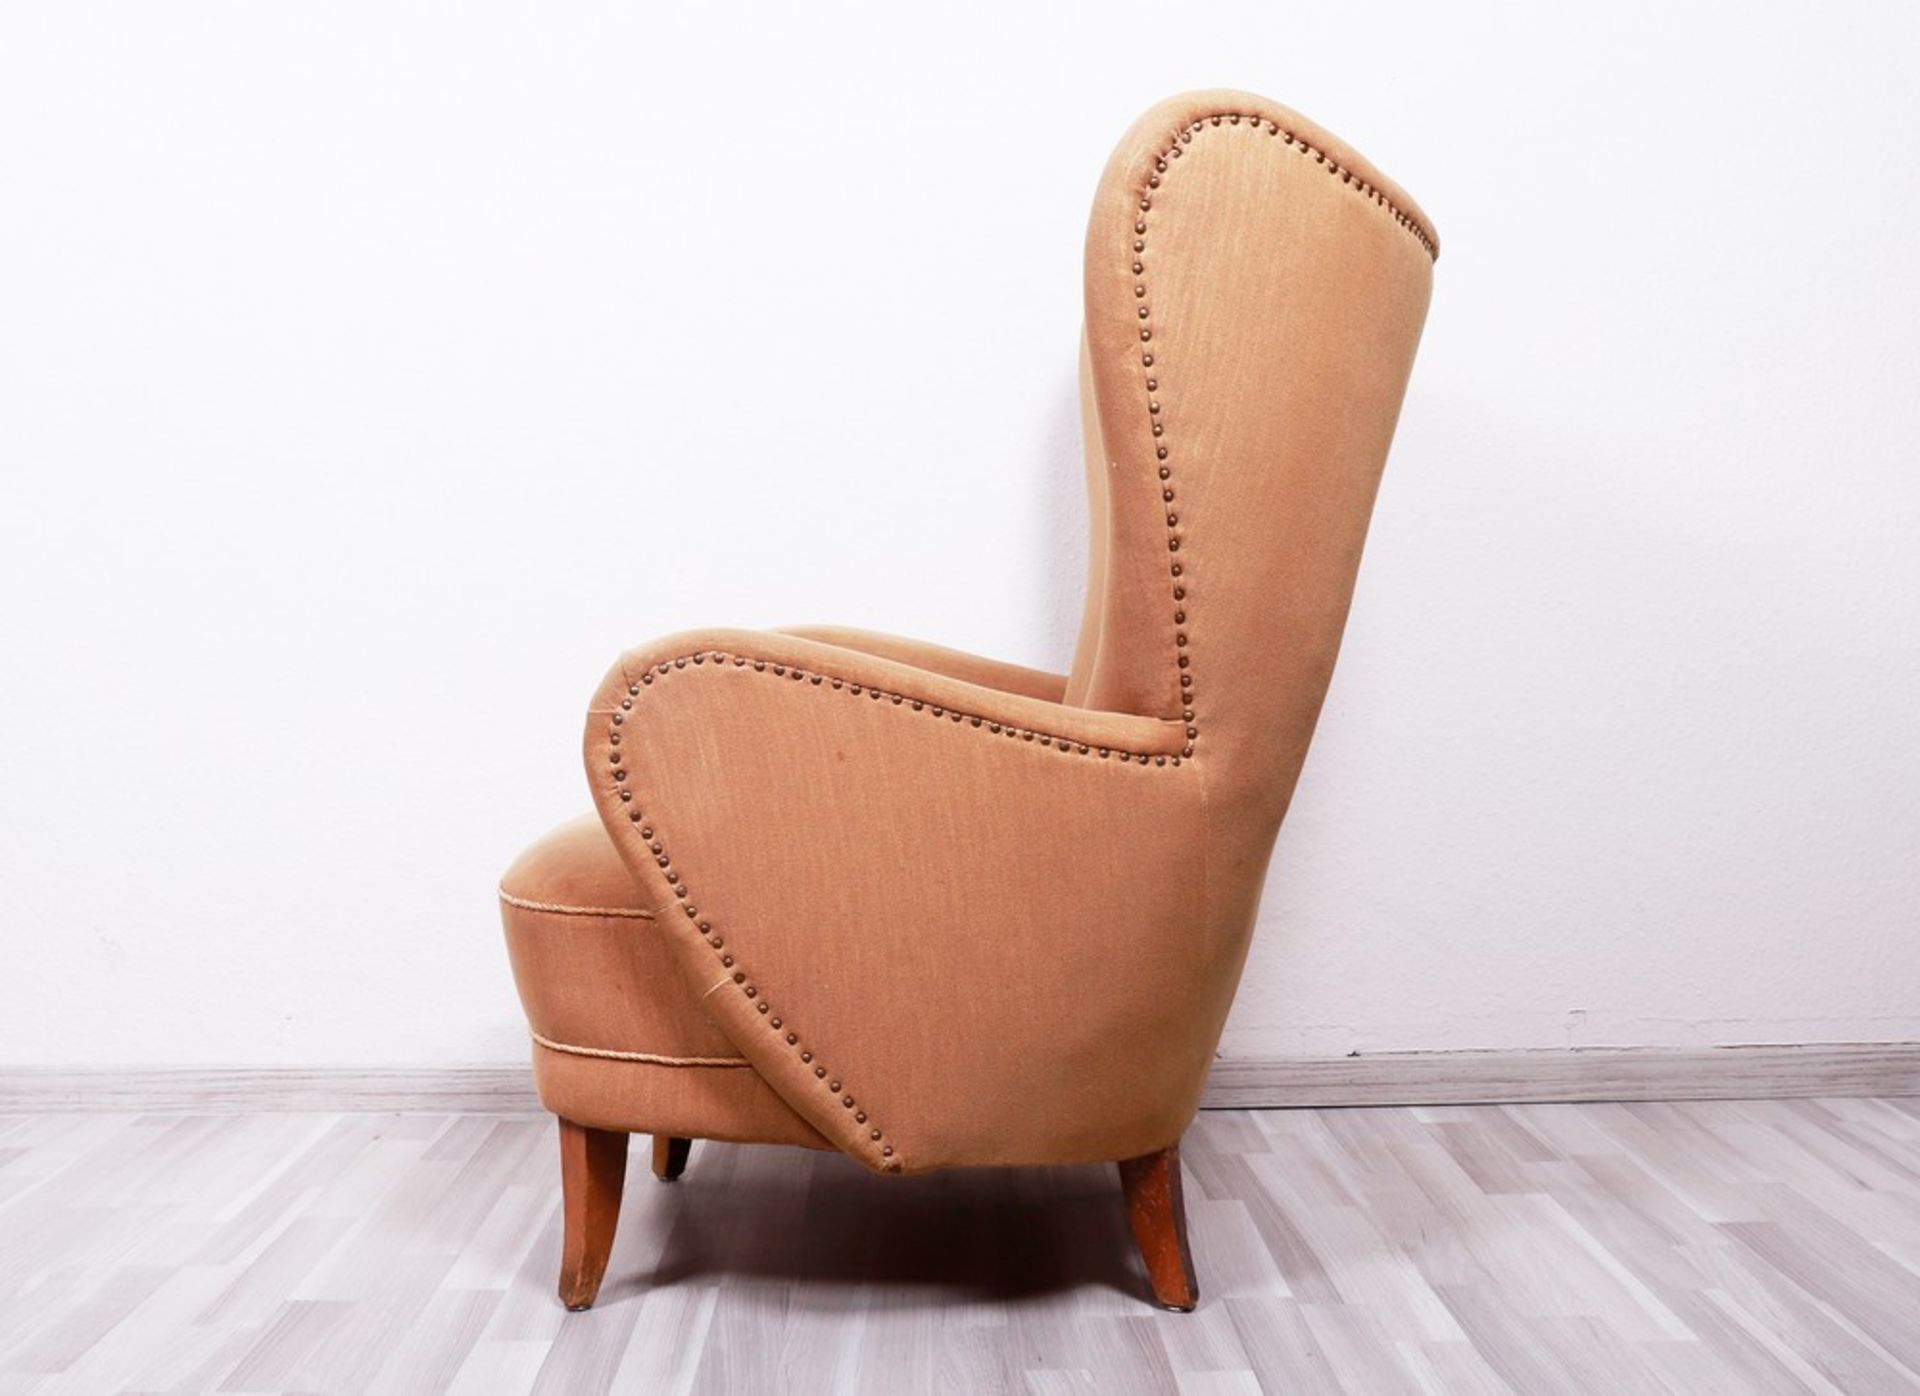 Wing chair, Adolf Wrenger, 1950s - Image 3 of 6